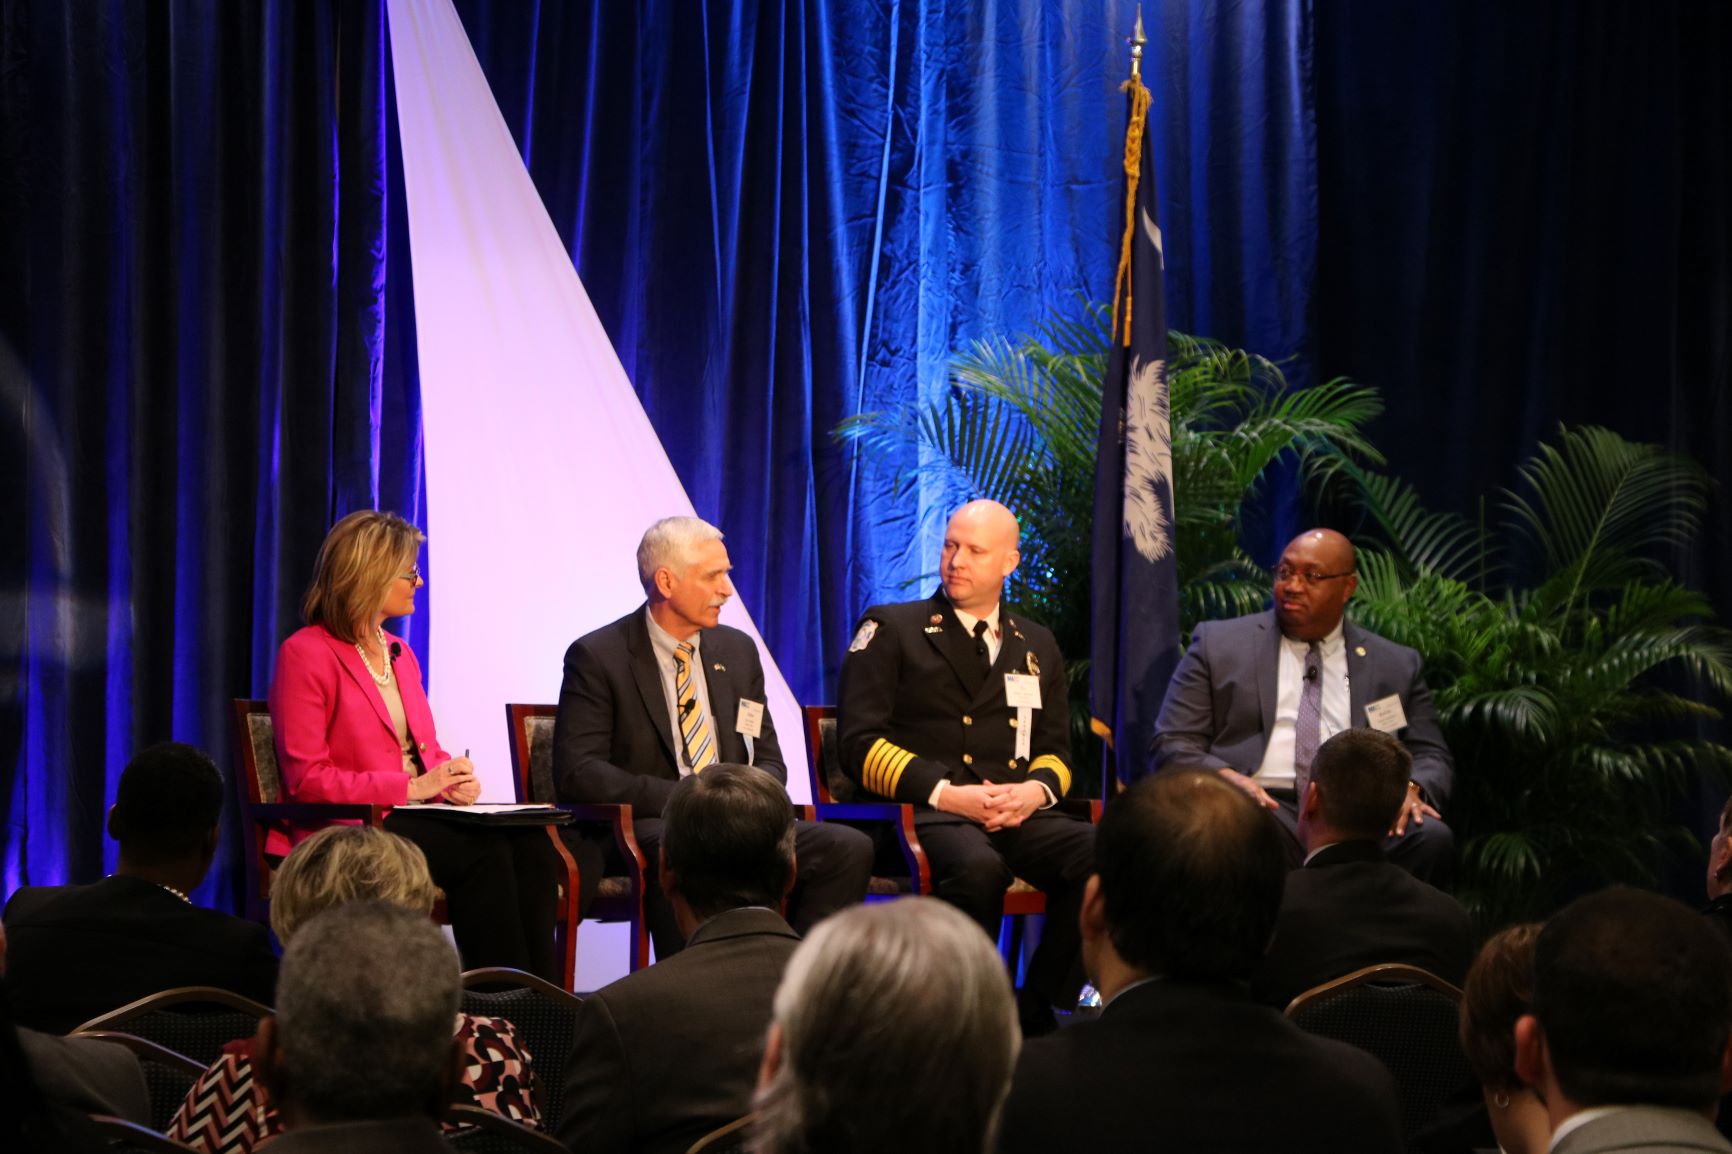 Panel discussion on crisis communication during the 2019 Hometown Legislative Action Day